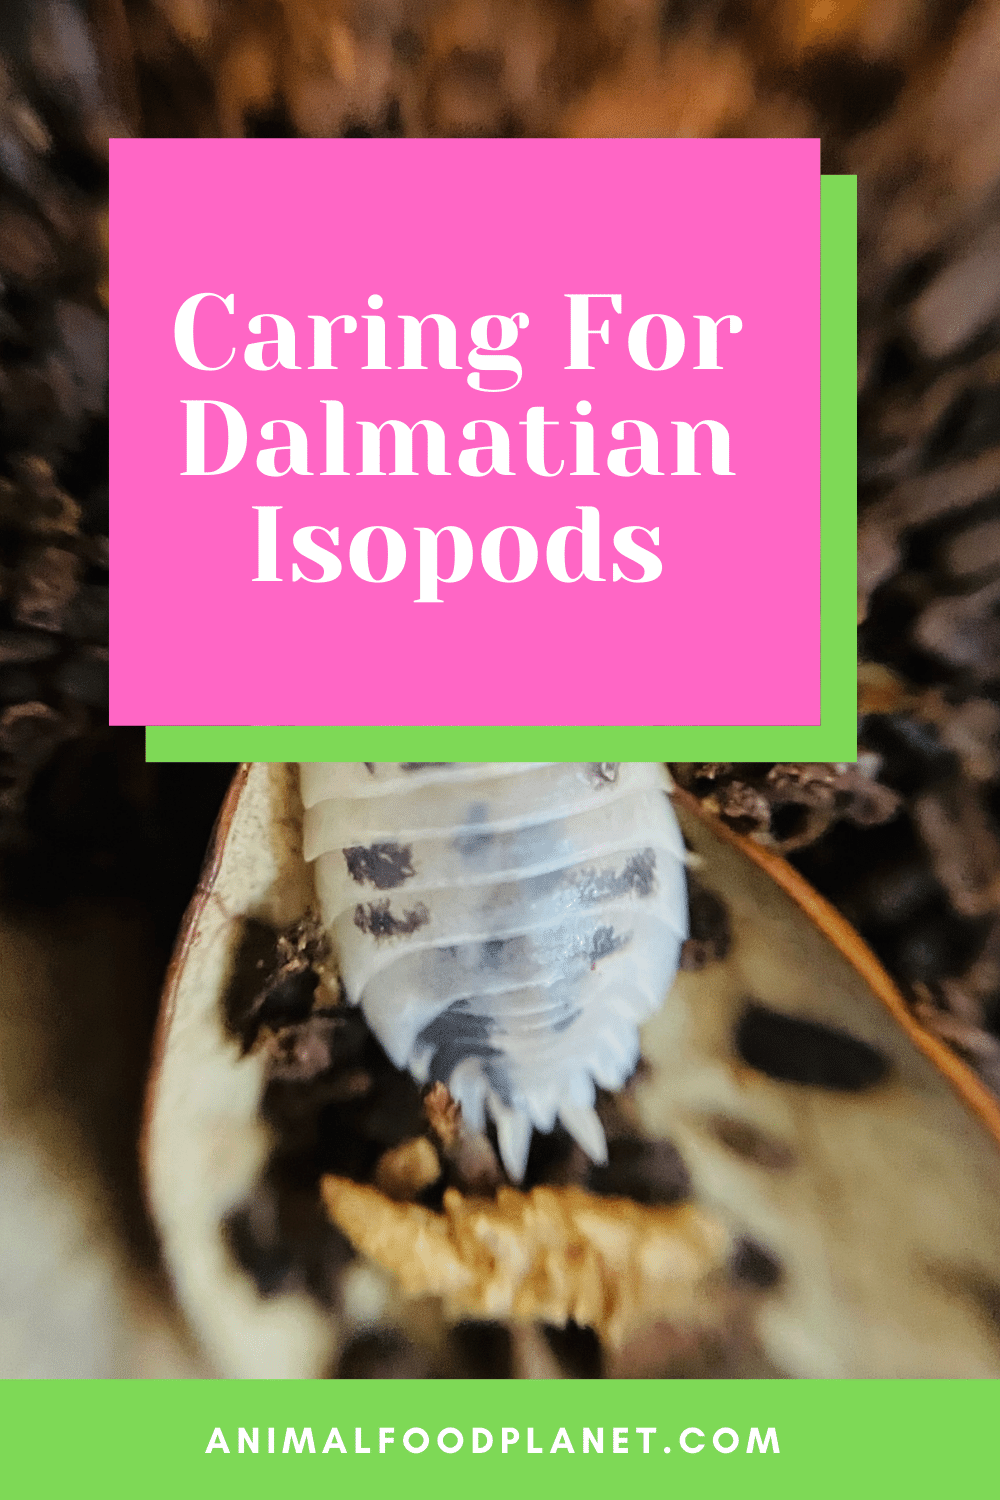 Caring For Dalmatian Isopods